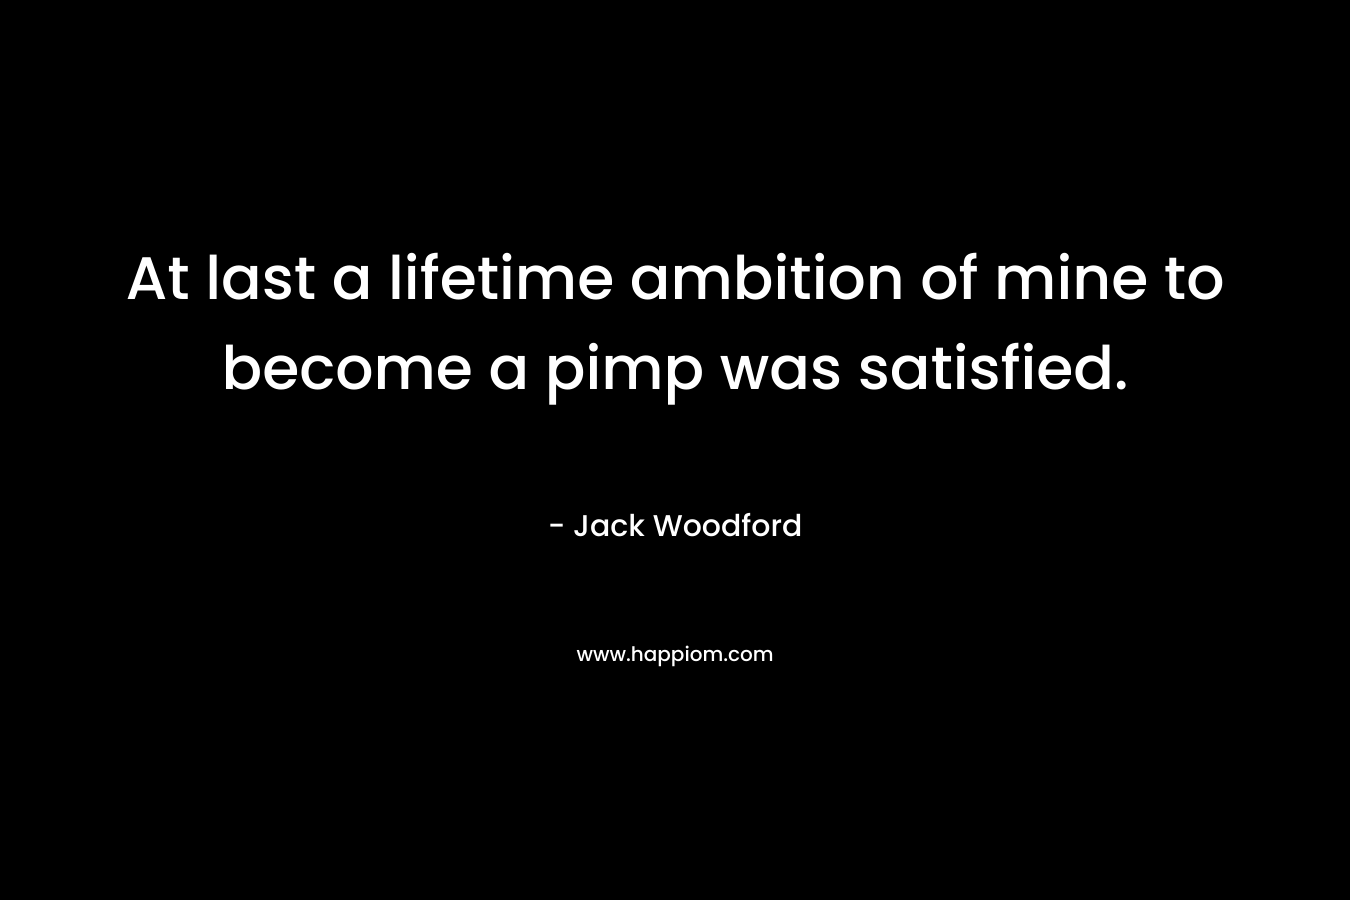 At last a lifetime ambition of mine to become a pimp was satisfied. – Jack Woodford